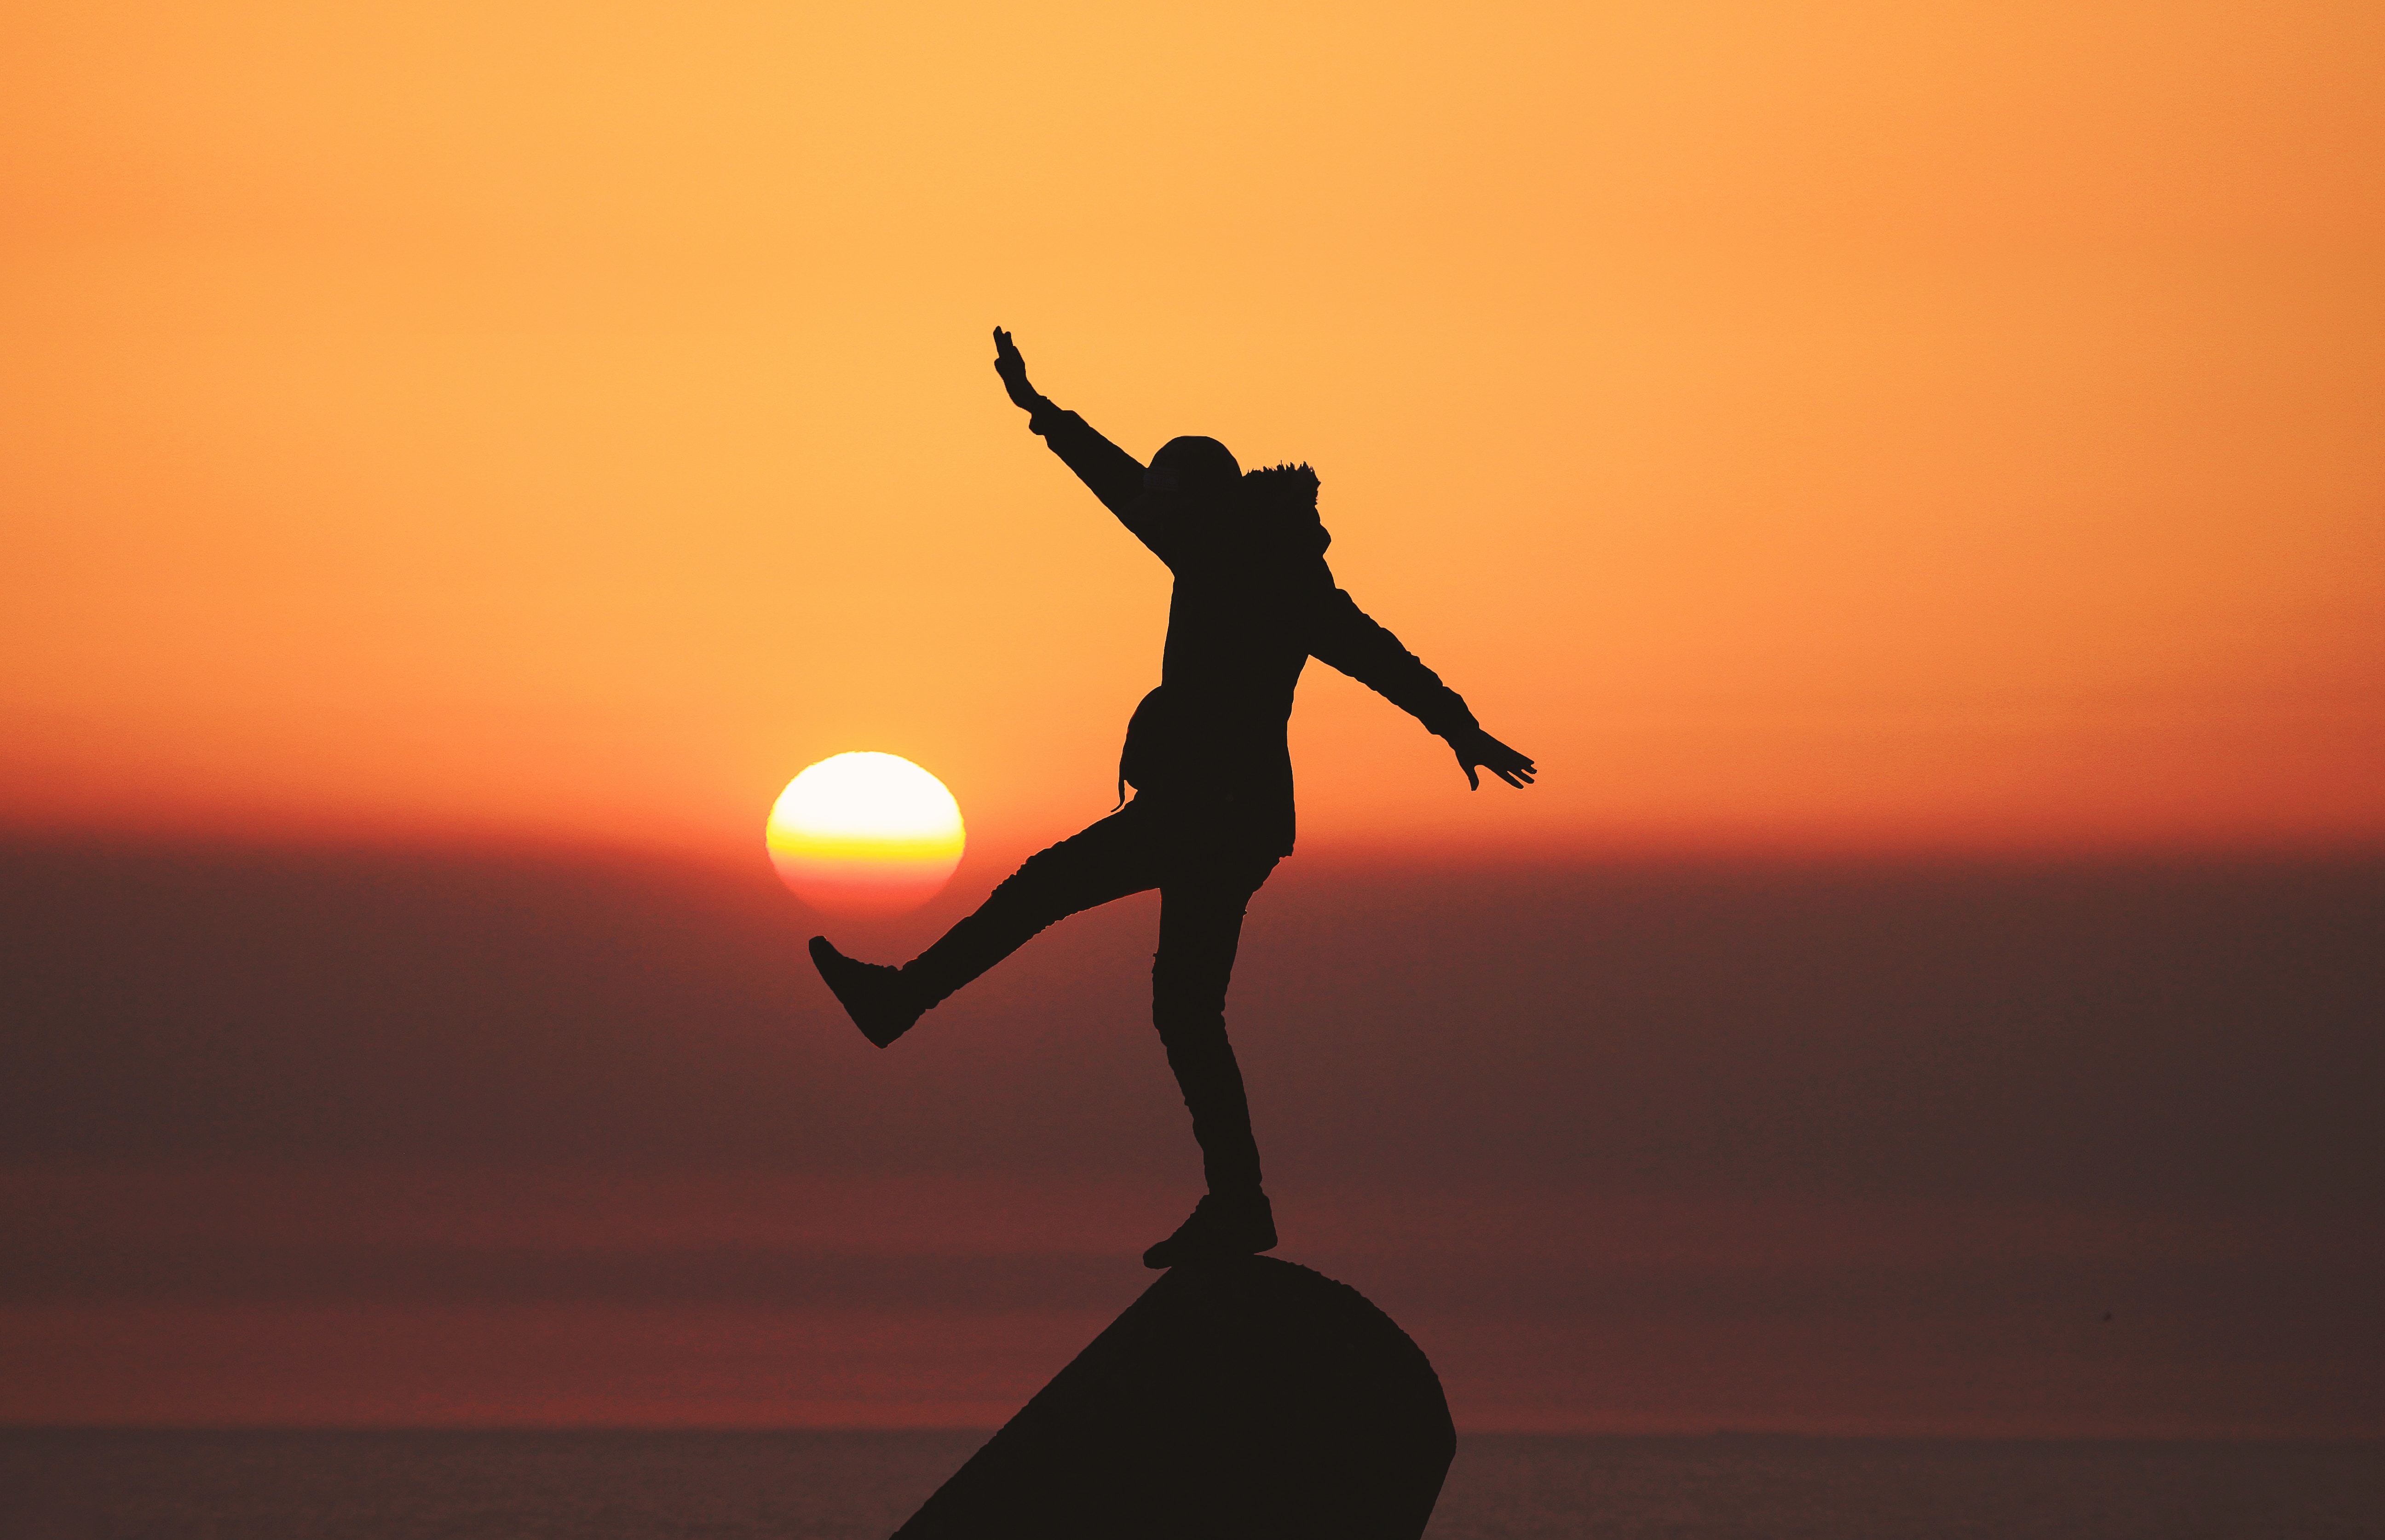 An individual balancing on a rock in front of the sunset.│Source: Unsplash